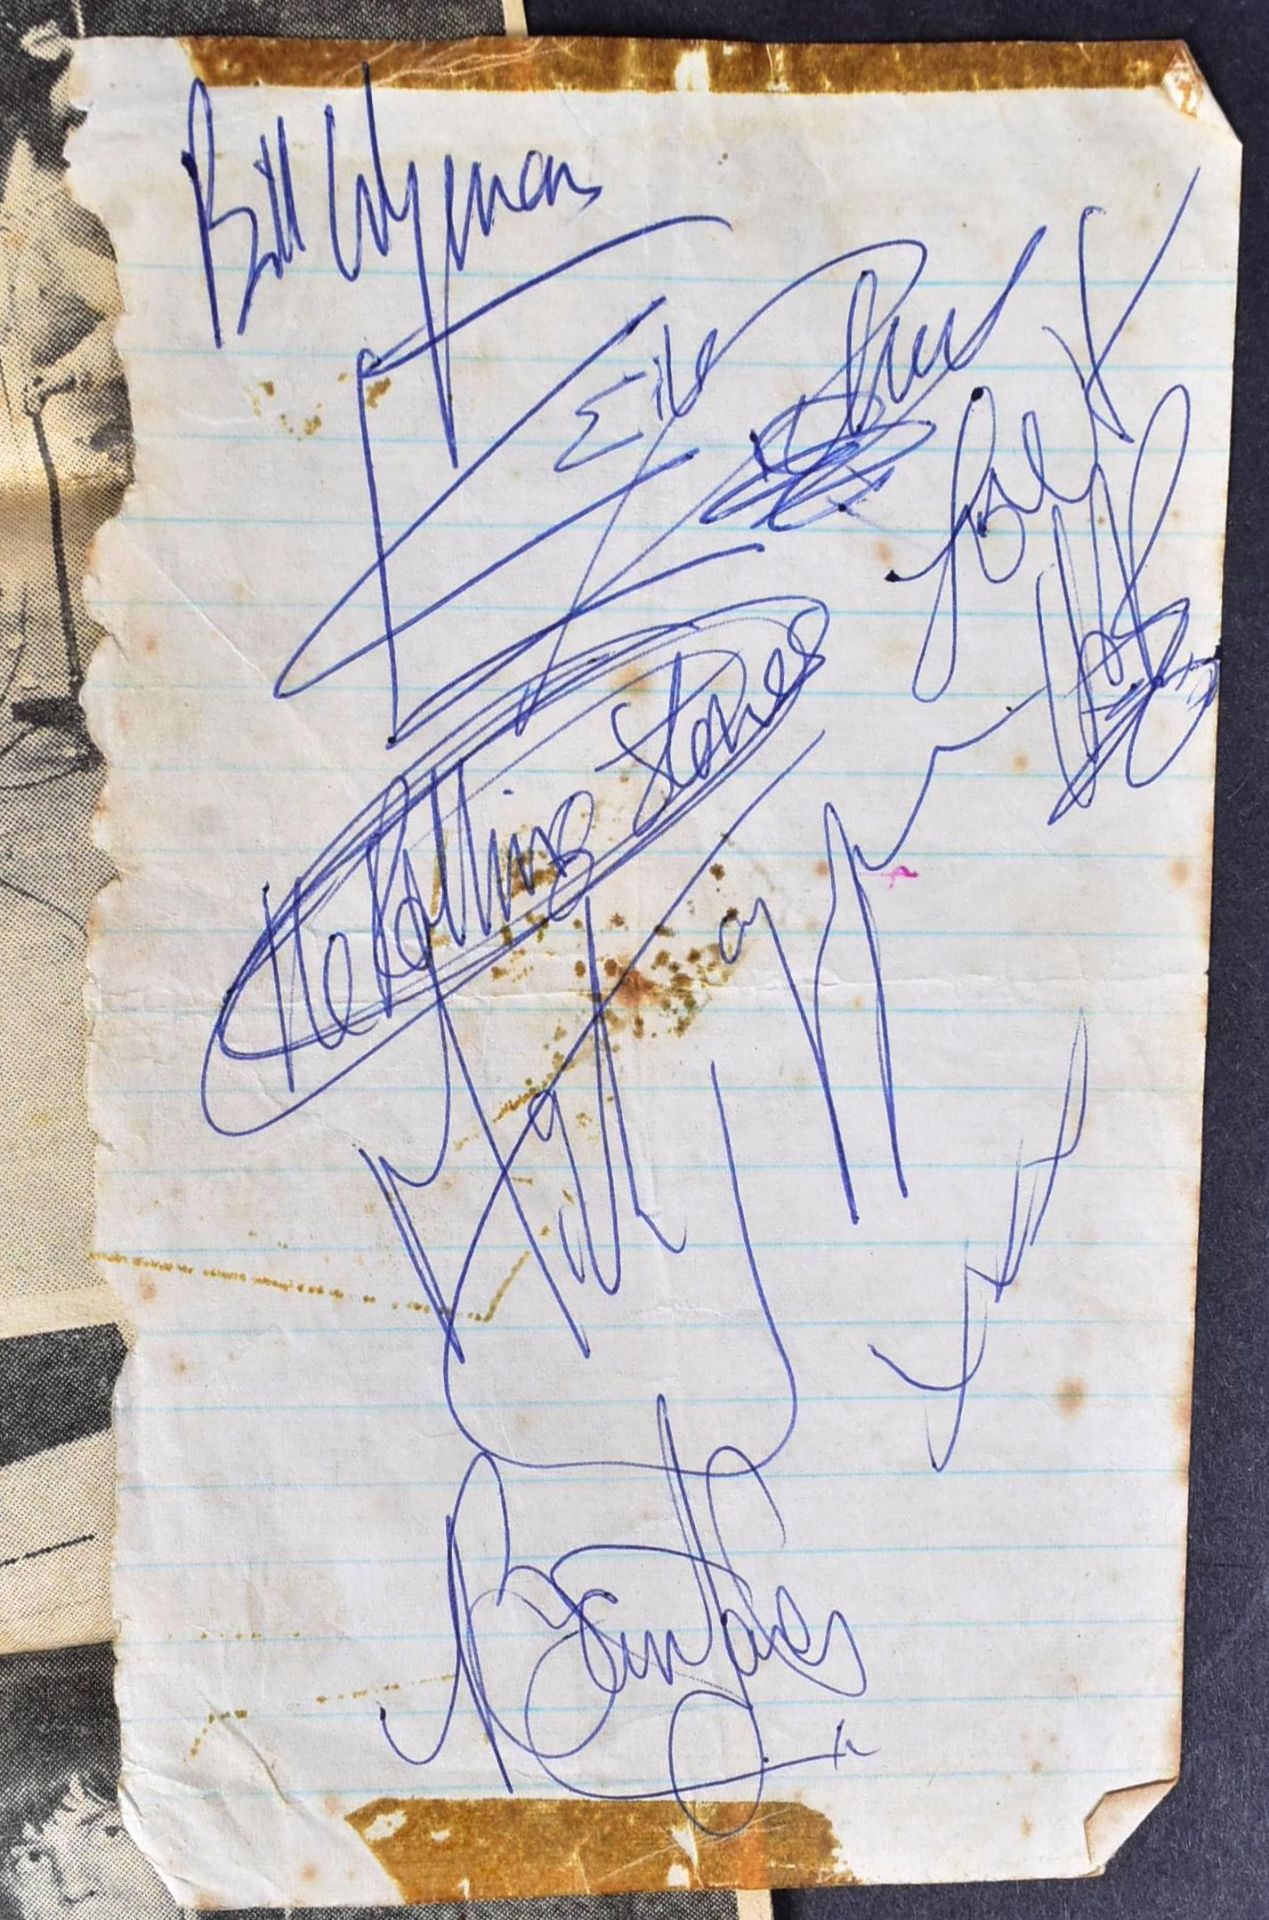 THE ROLLING STONES - AUTOGRAPHS FROM BRISTOL 1964 - Image 5 of 5